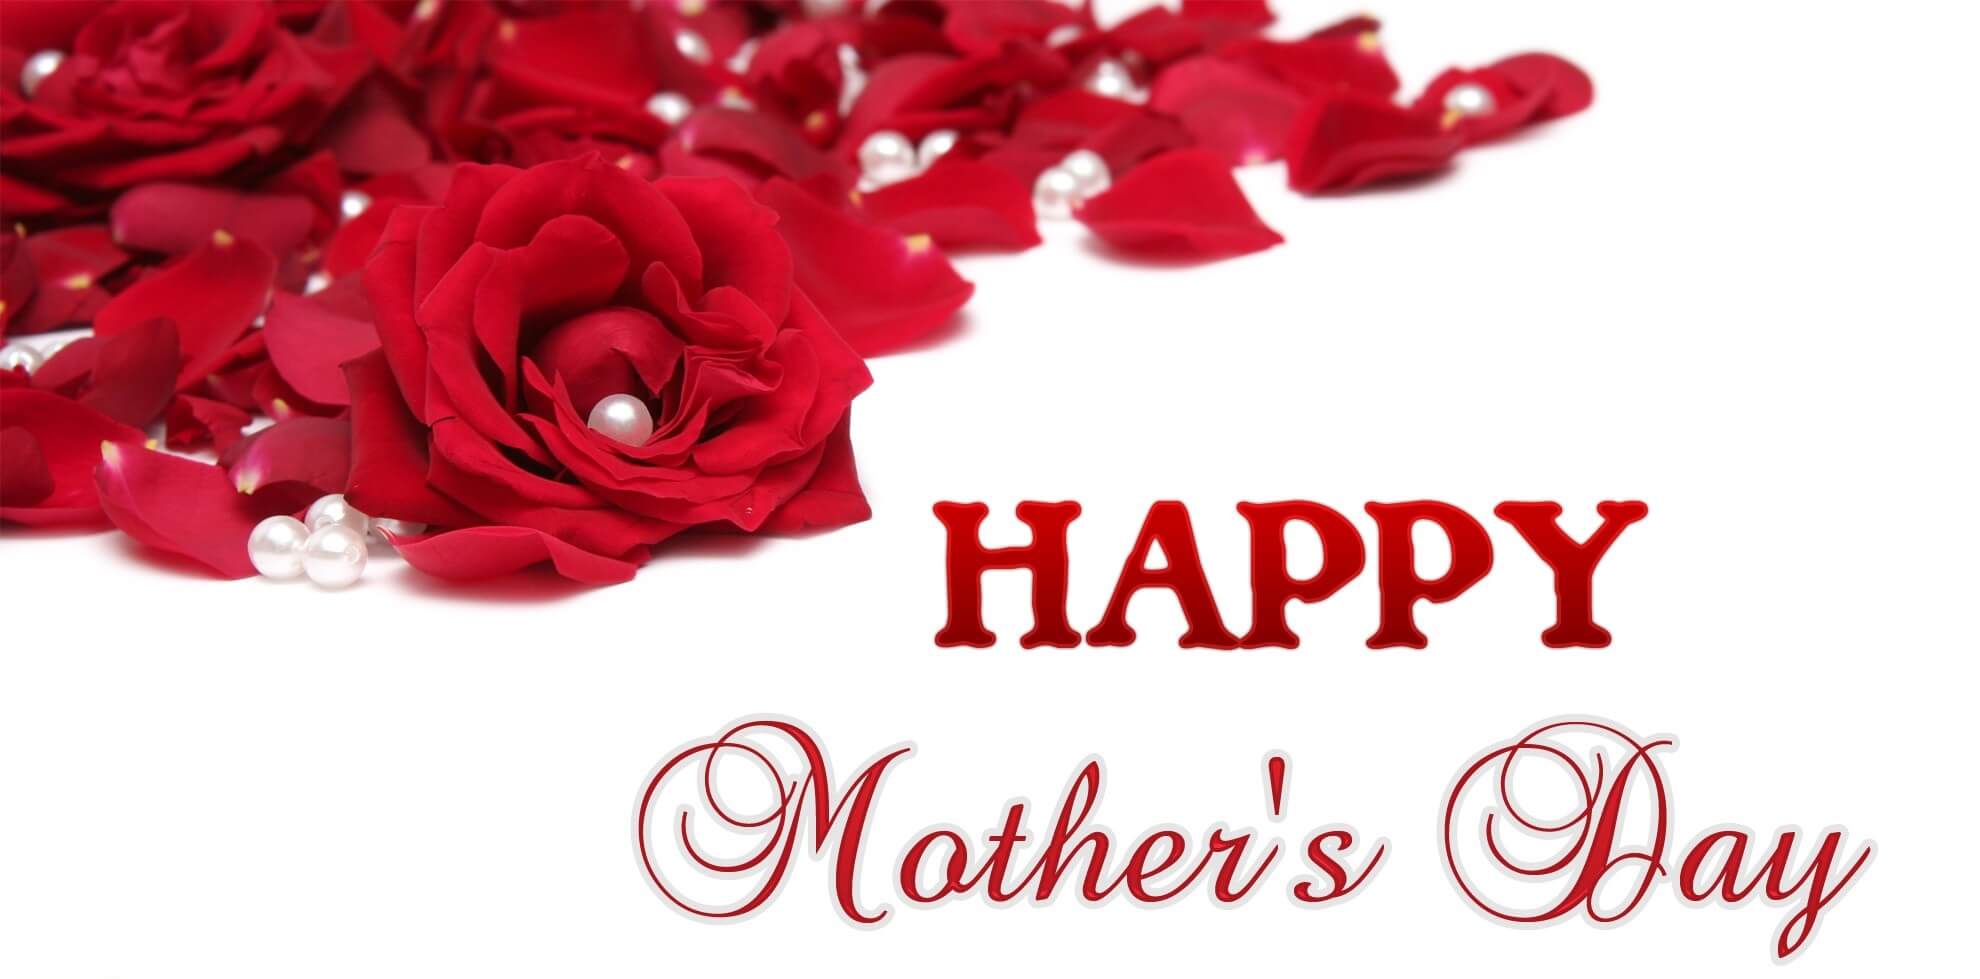 happy mothers day poems in hindi